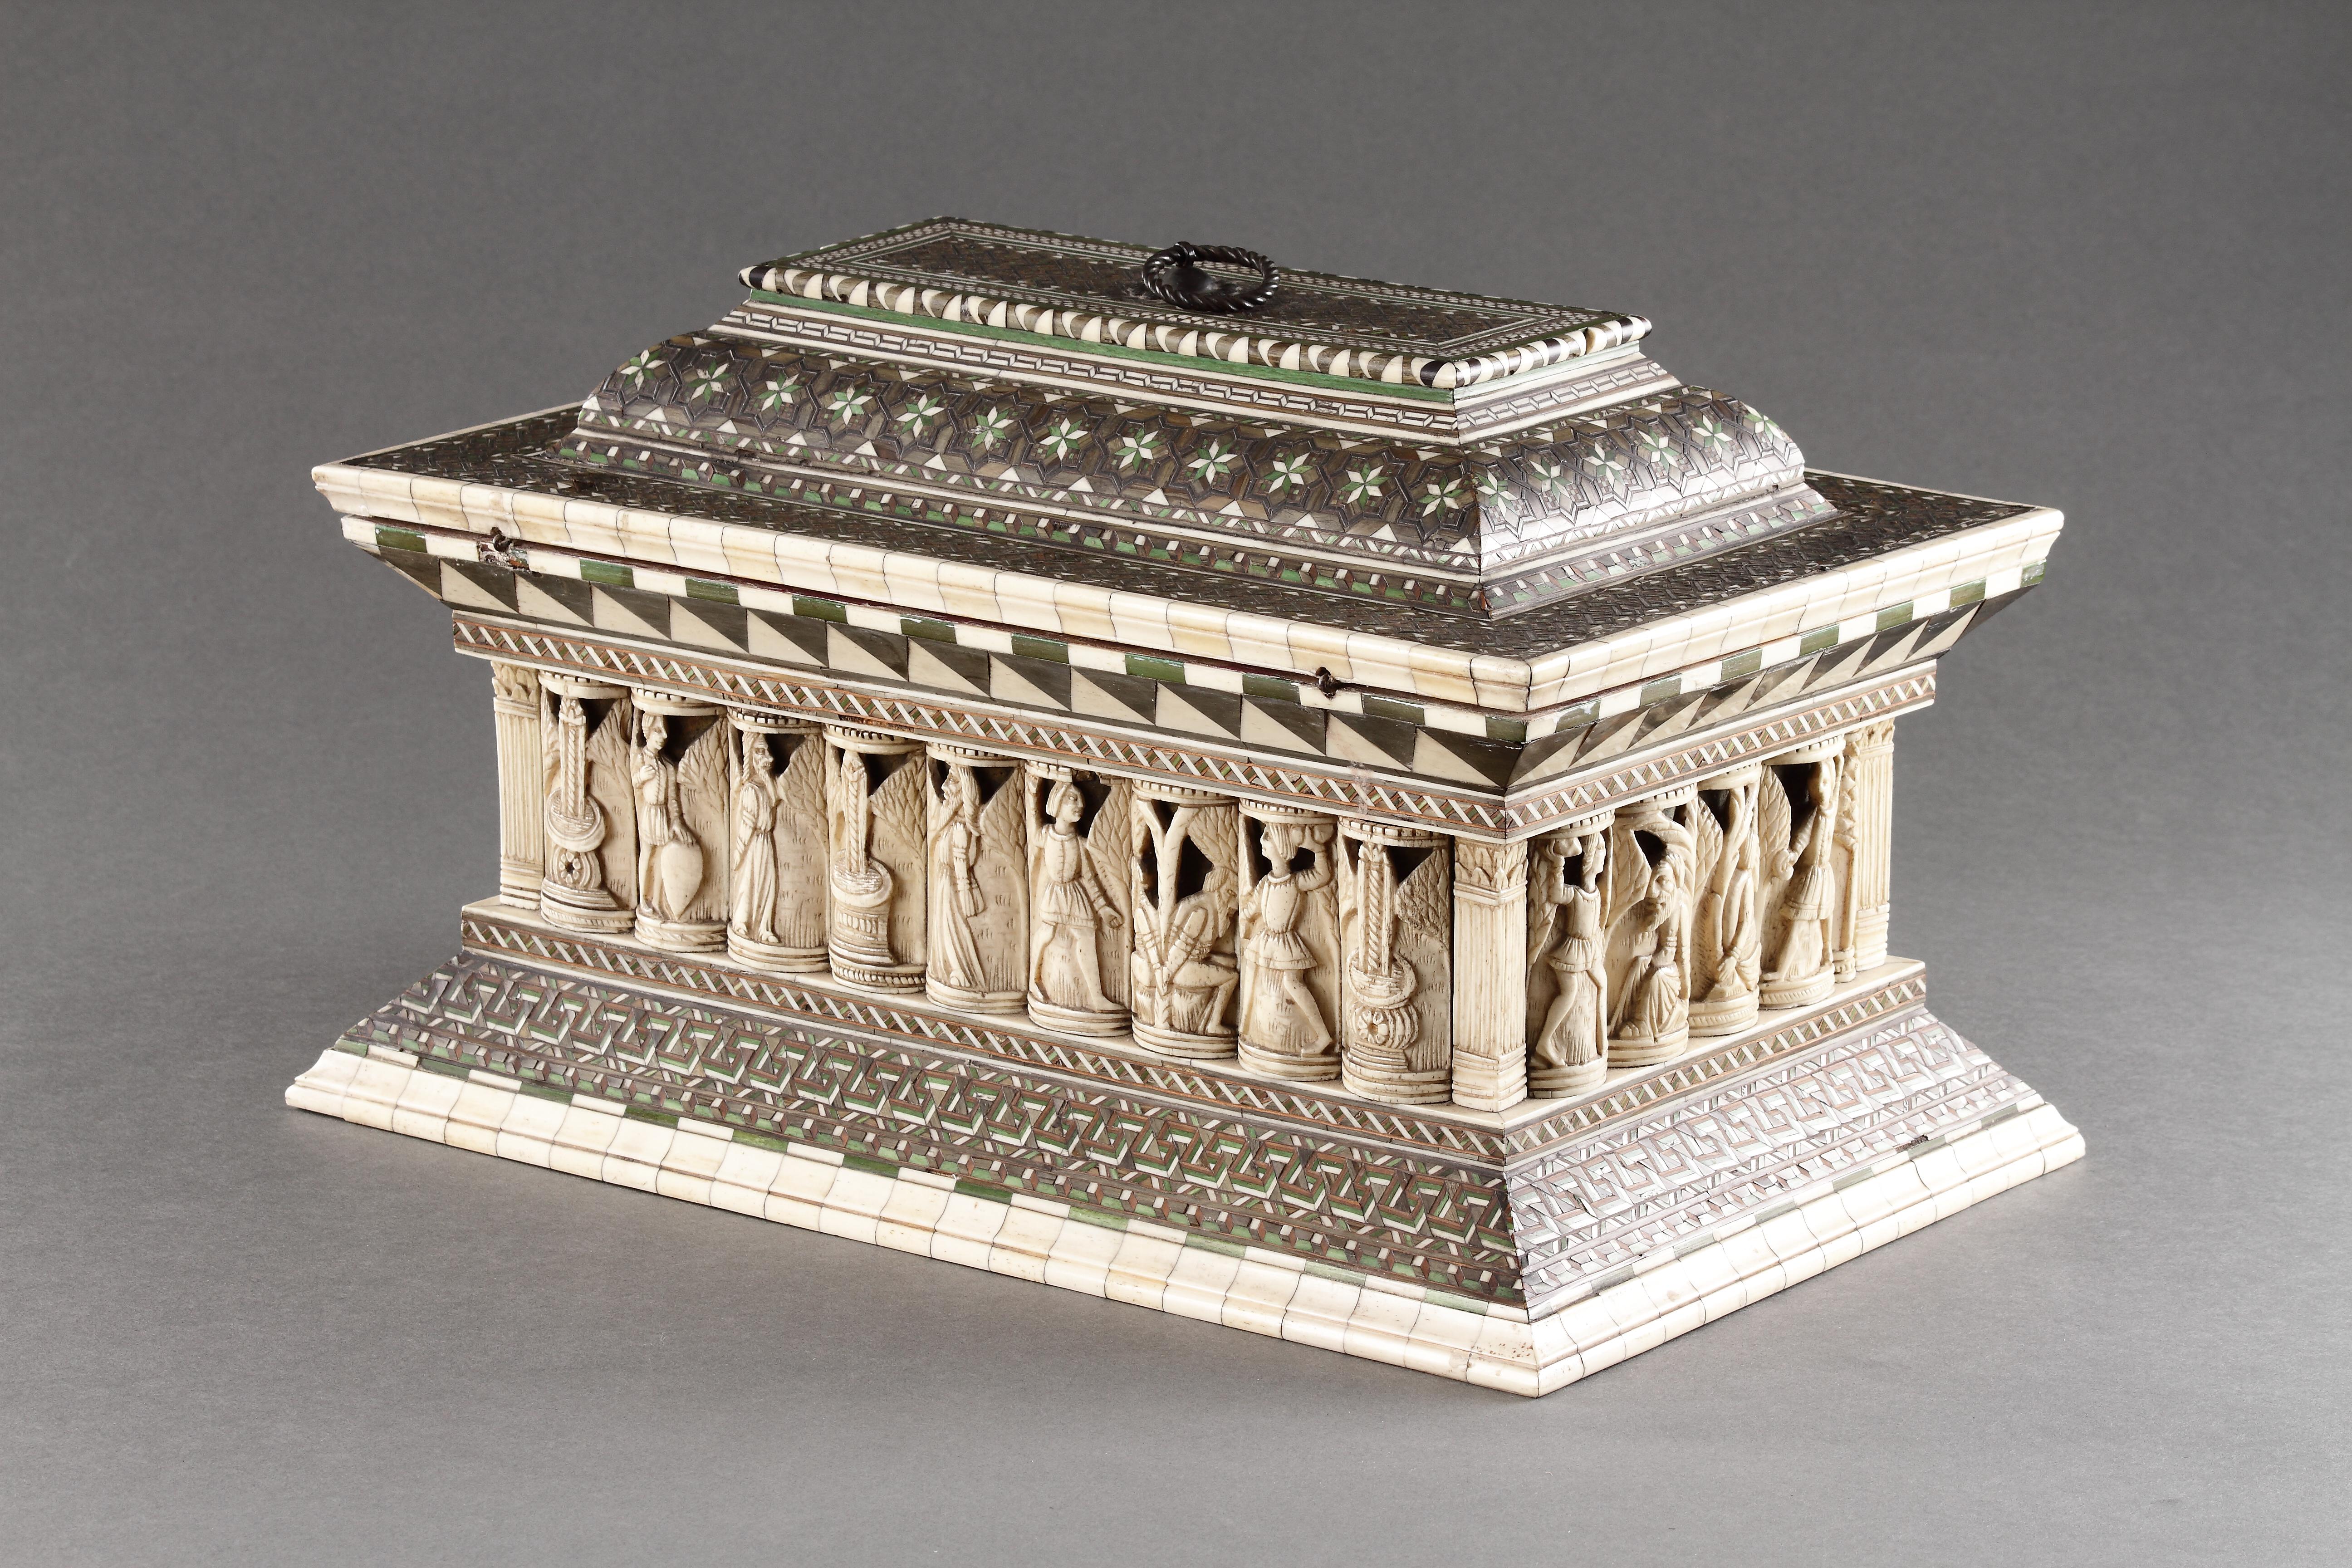 Metal A Rare and Important Sarcophagus ‘Wedding’ Casket For Sale